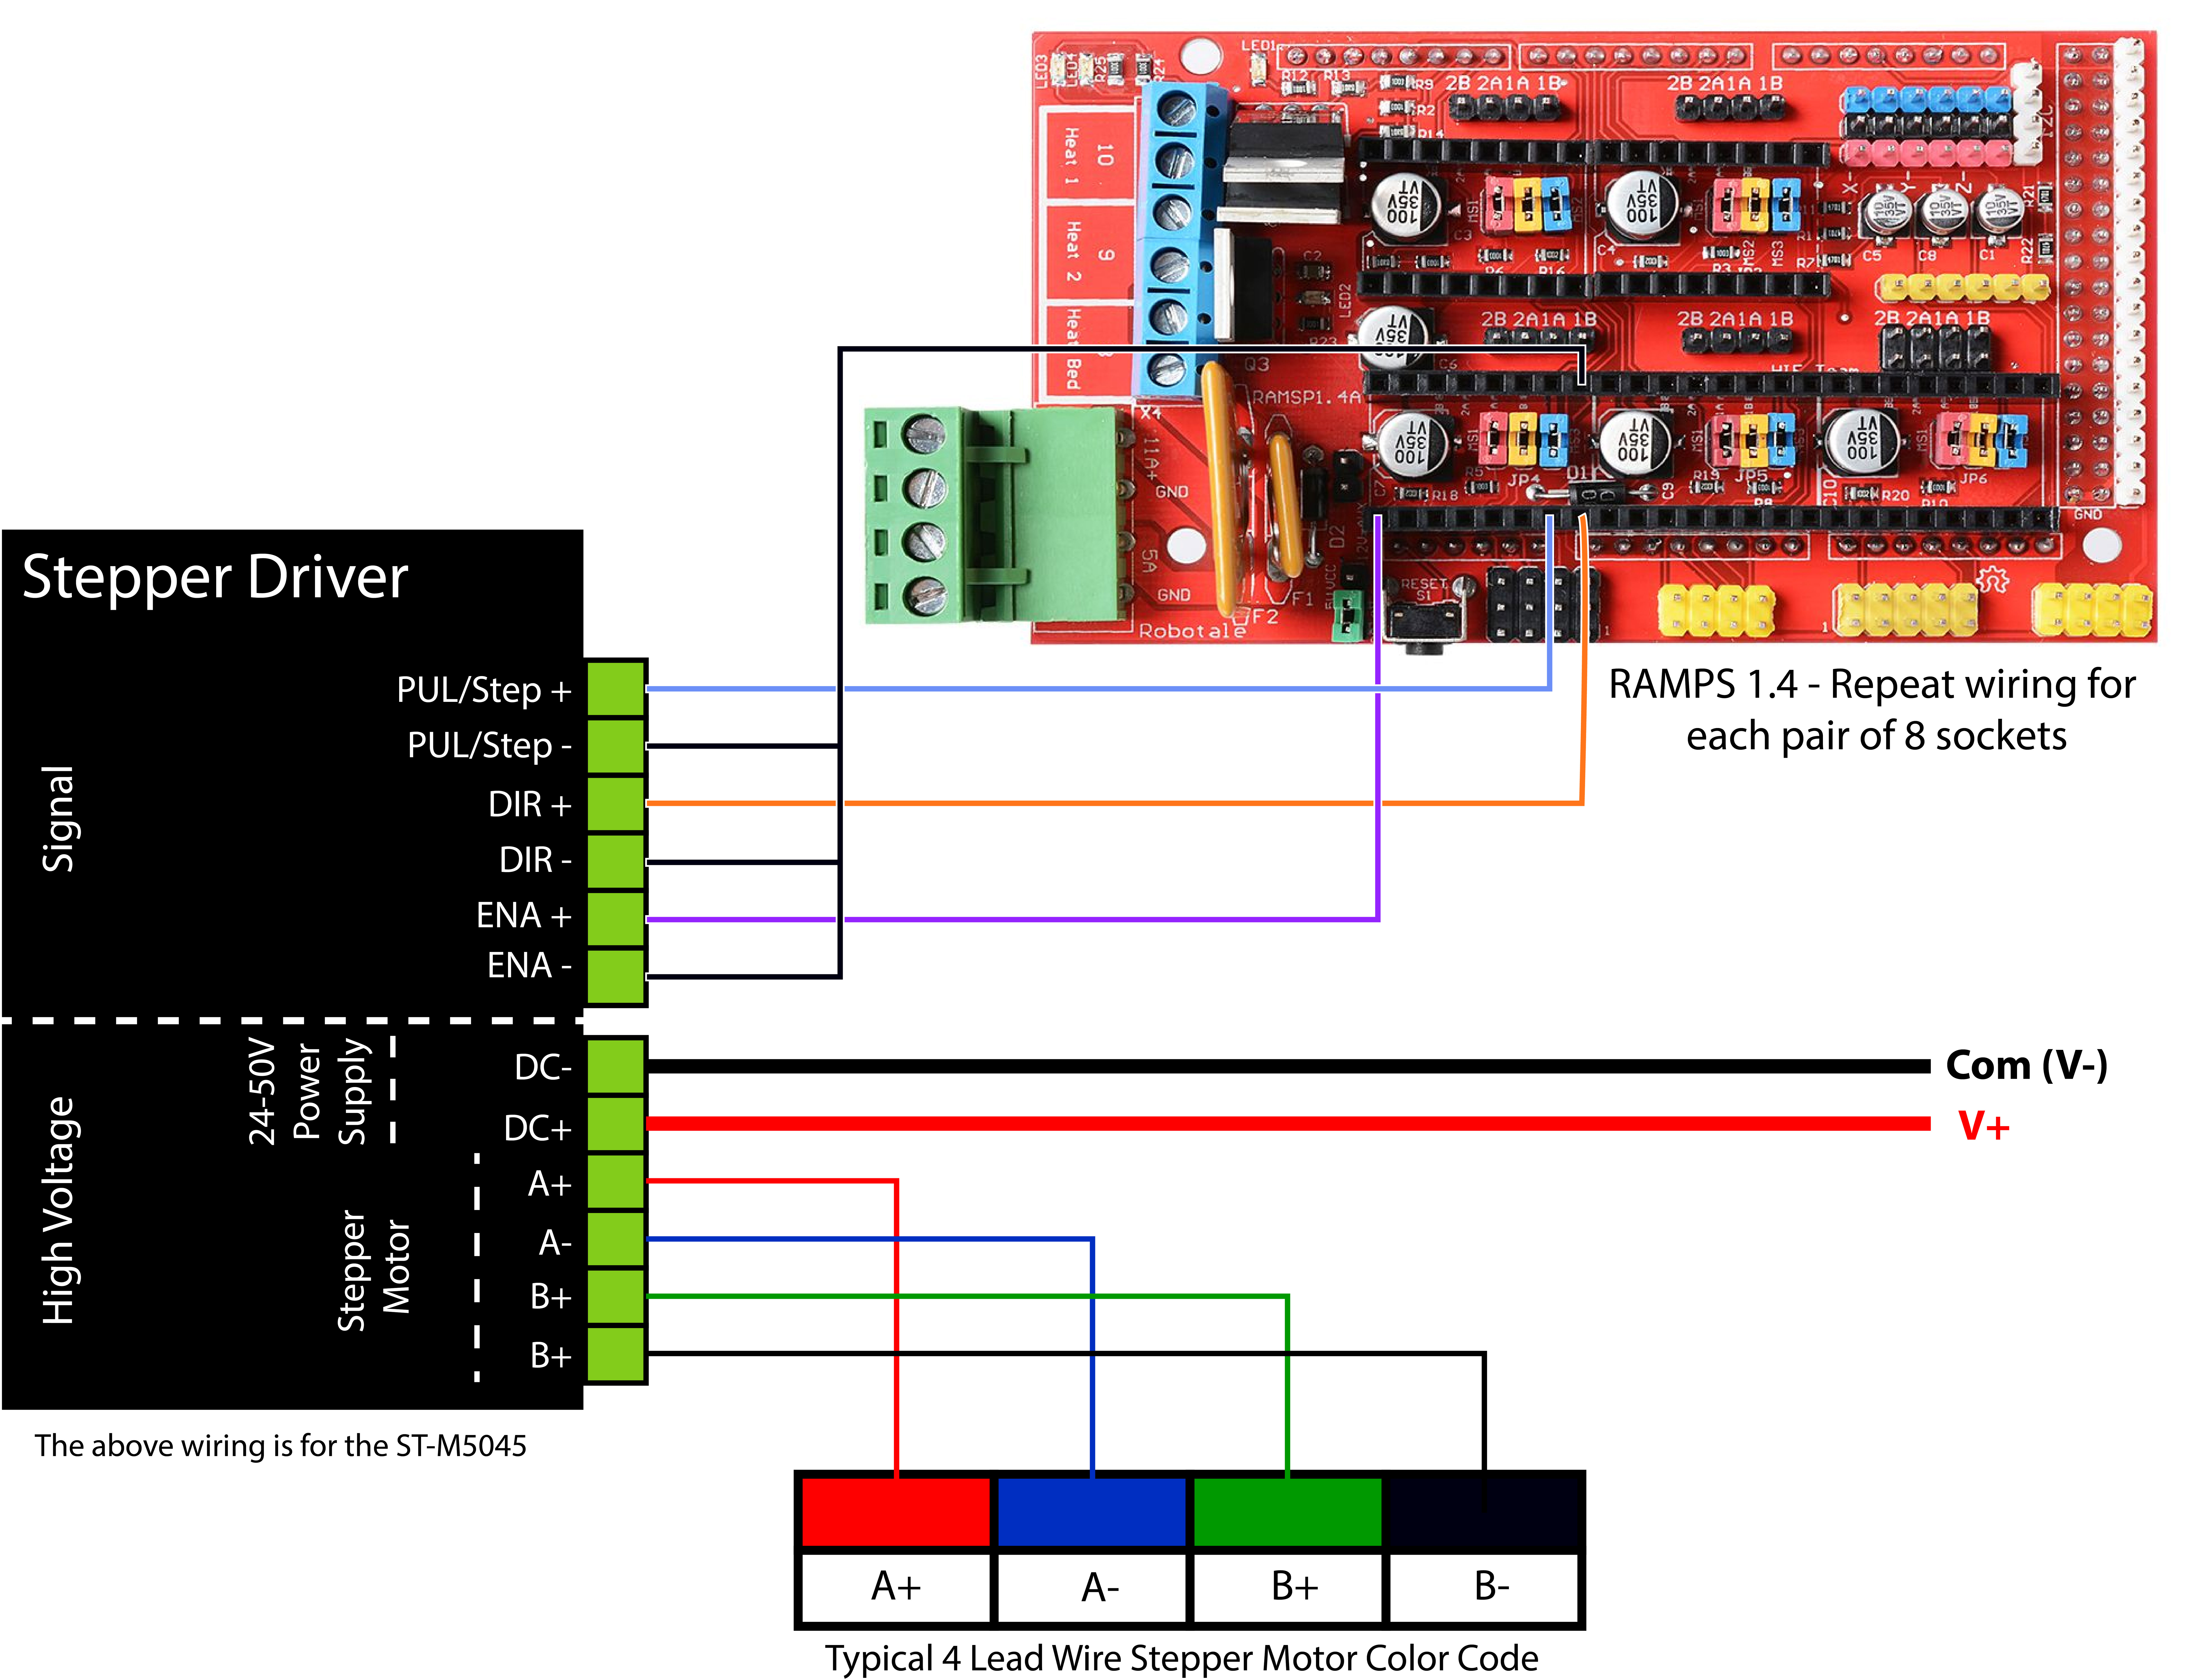 Wiring guide for connecting RAMPs 1.4 to external stepper driver